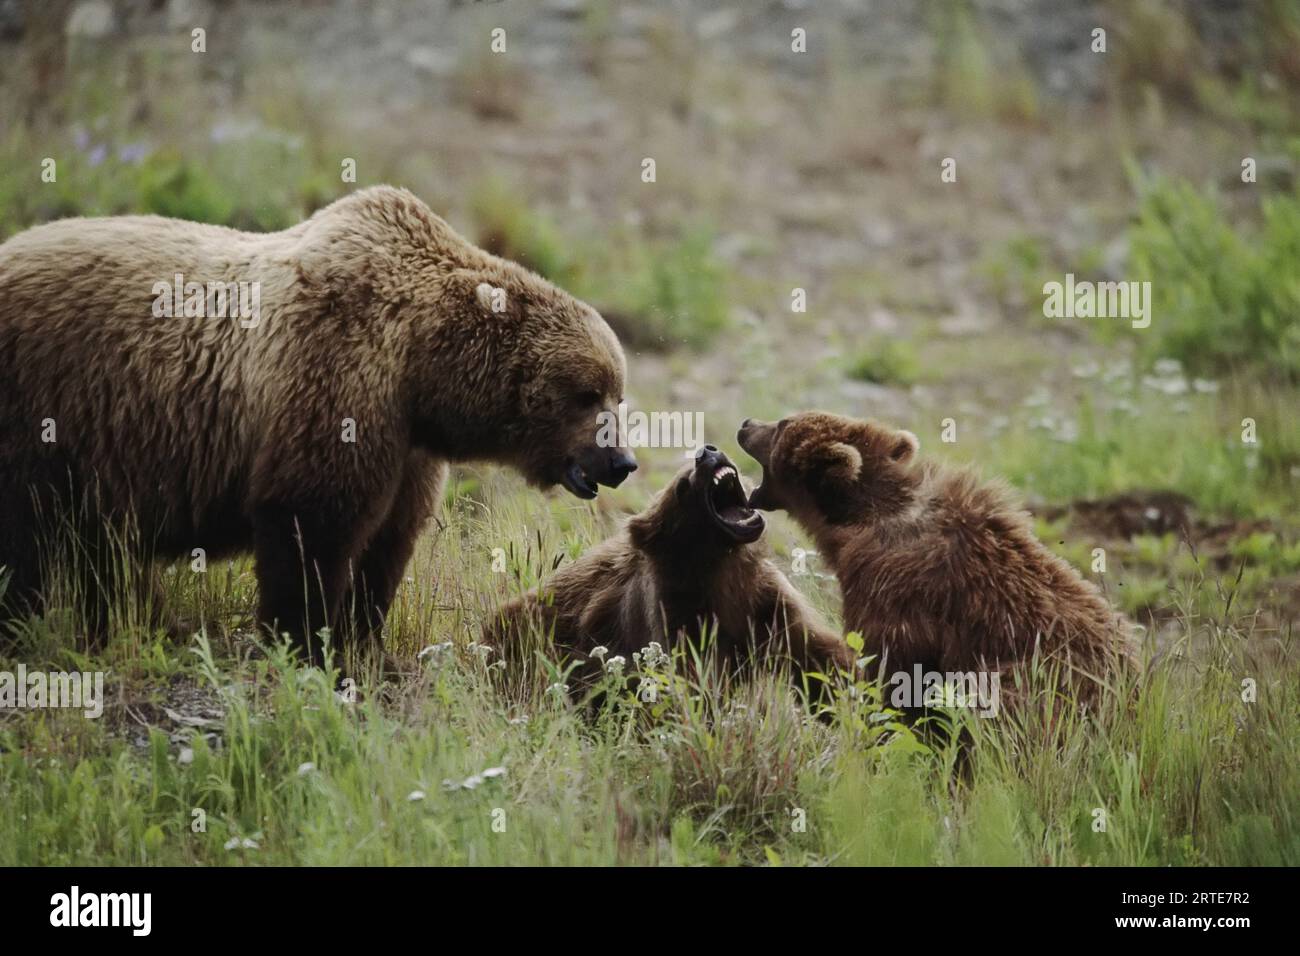 Mother grizzly bear (Ursus arctos horribilis) watches as her two cubs carry on play fighting; Larson Bay, Alaska, United States of America Stock Photo